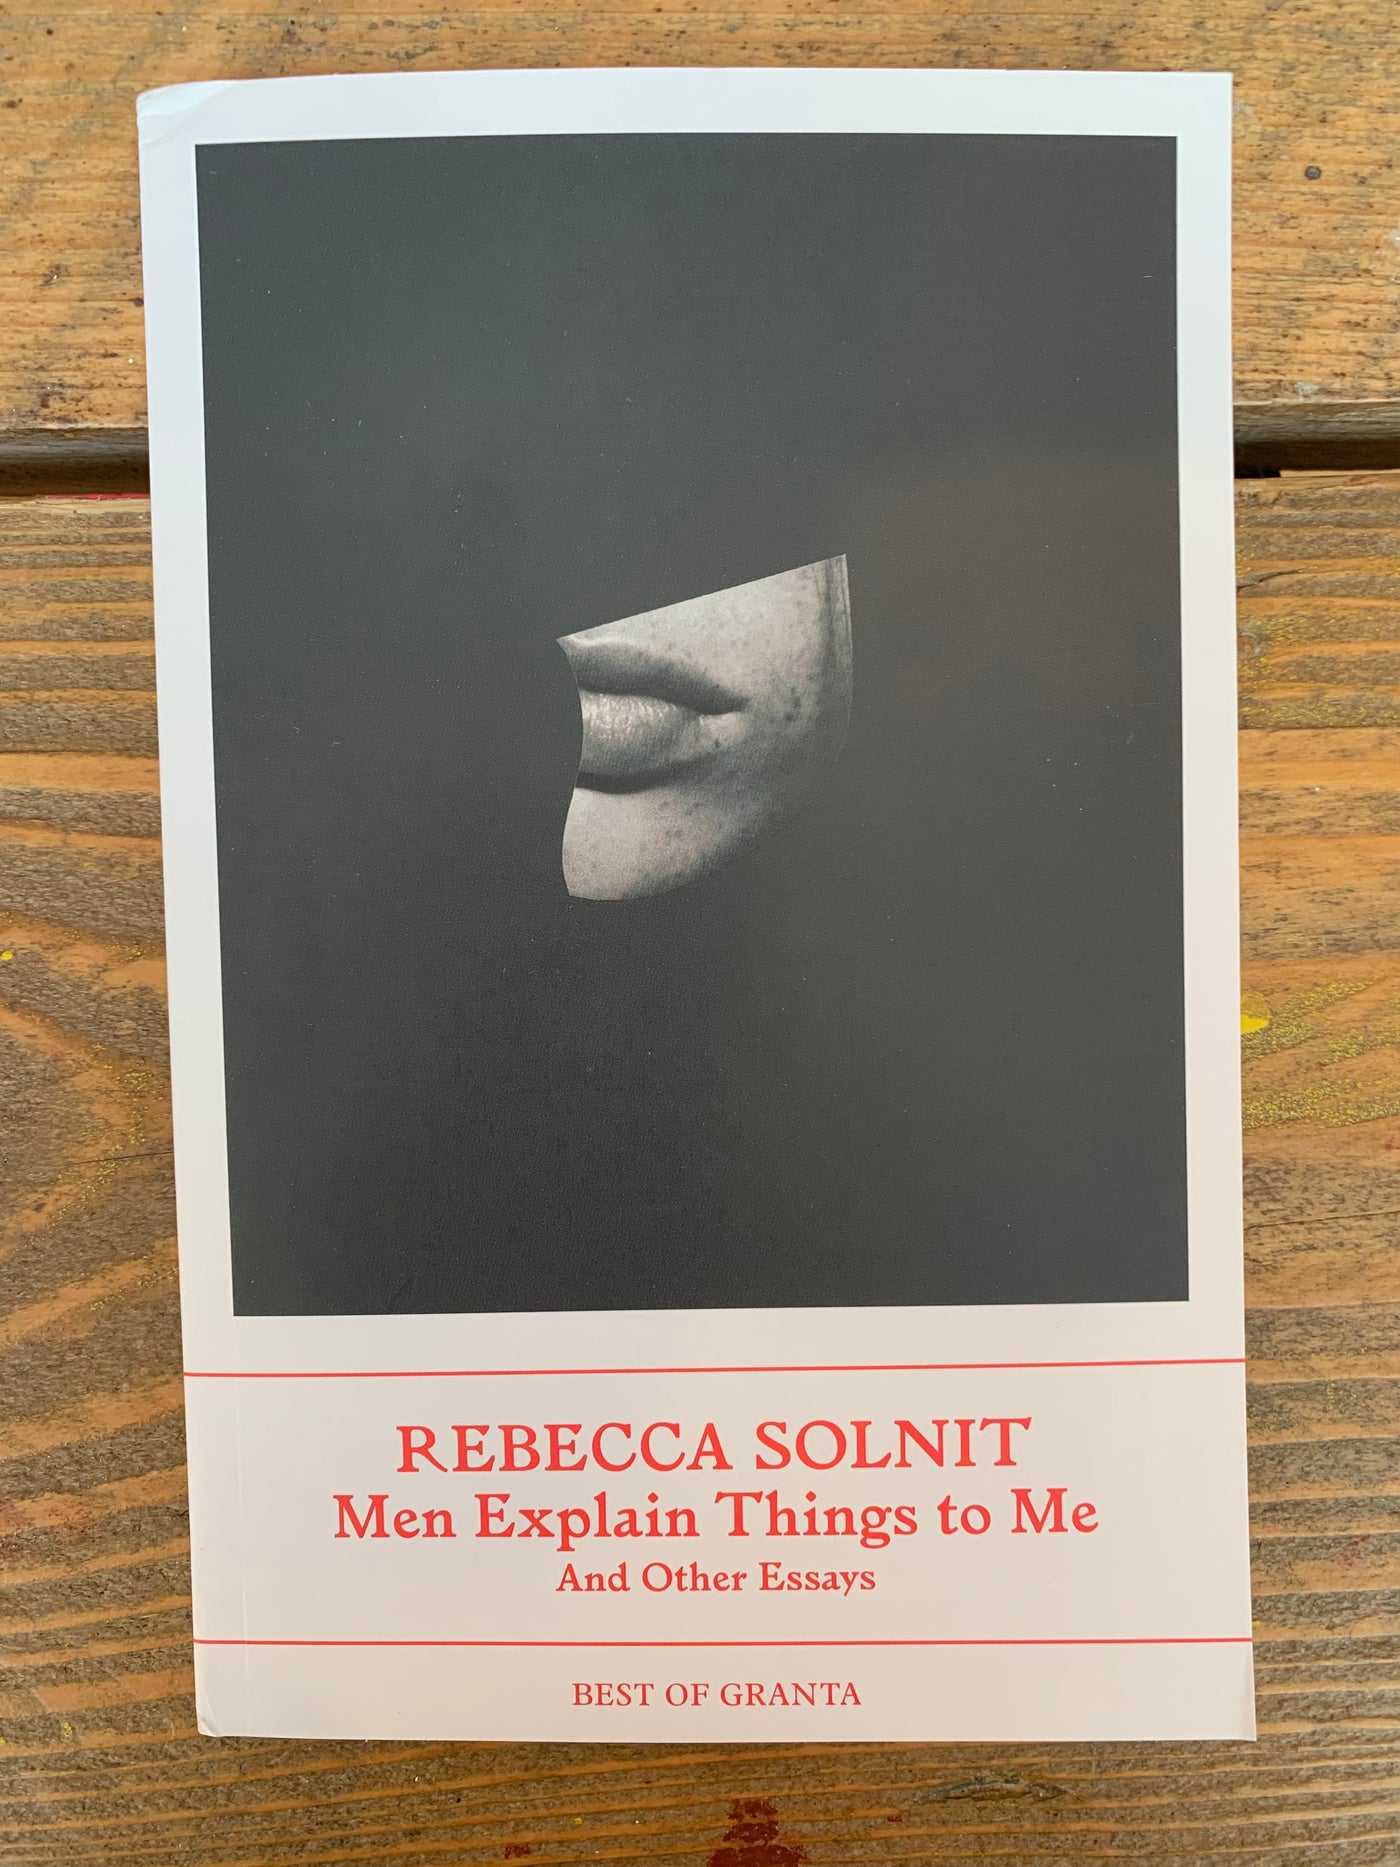 Men Explain Things to Me: And Other Essays